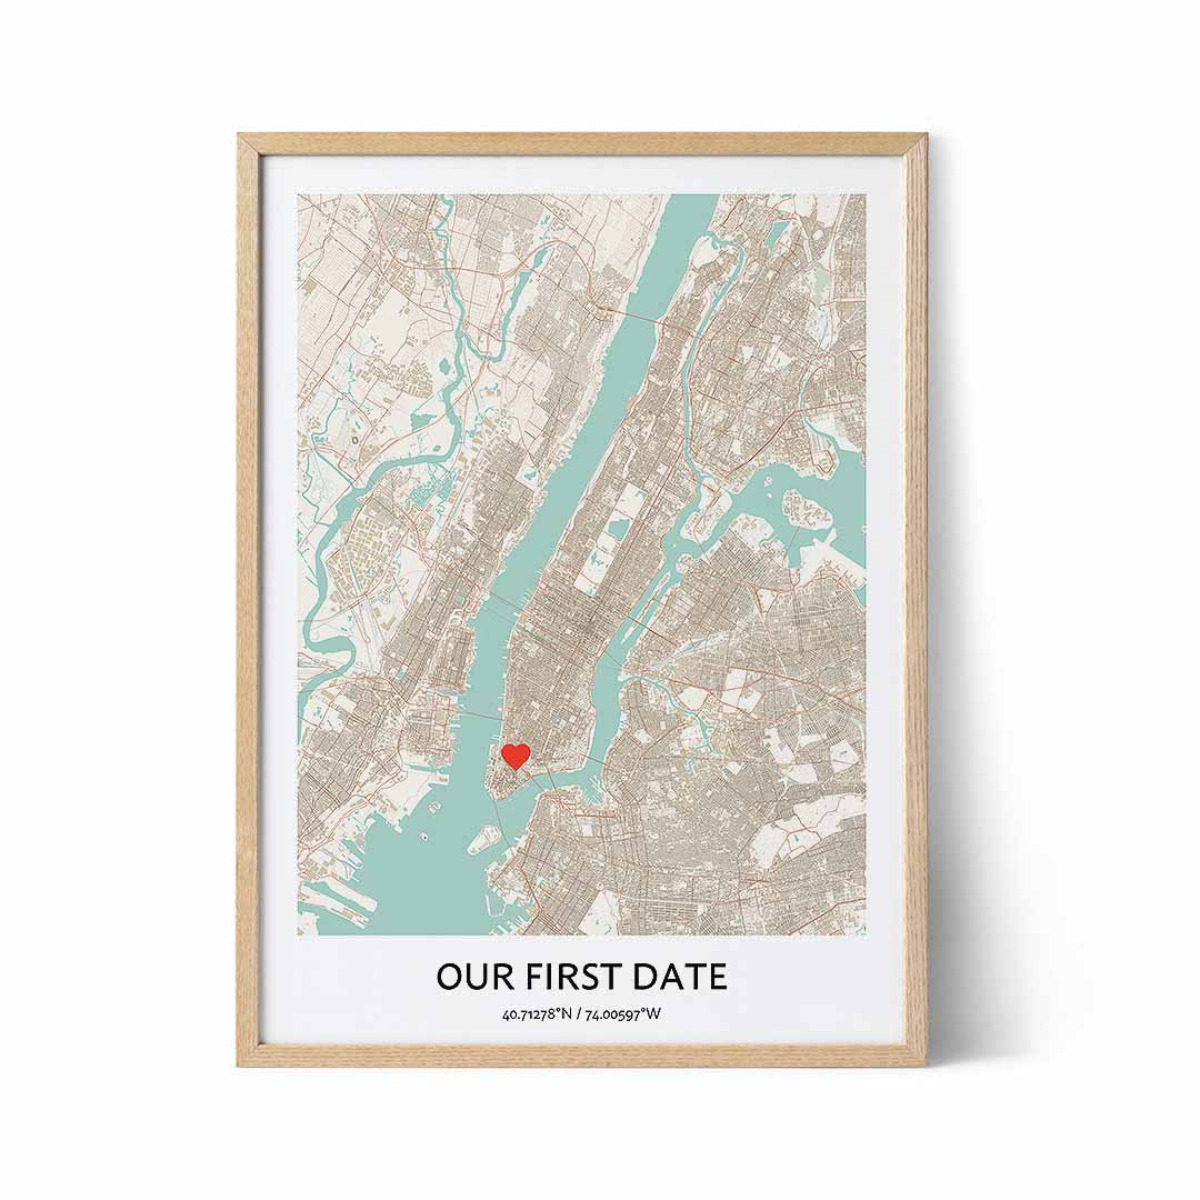 34. Capture Your Love Story with a Customized Anniversary Date Map